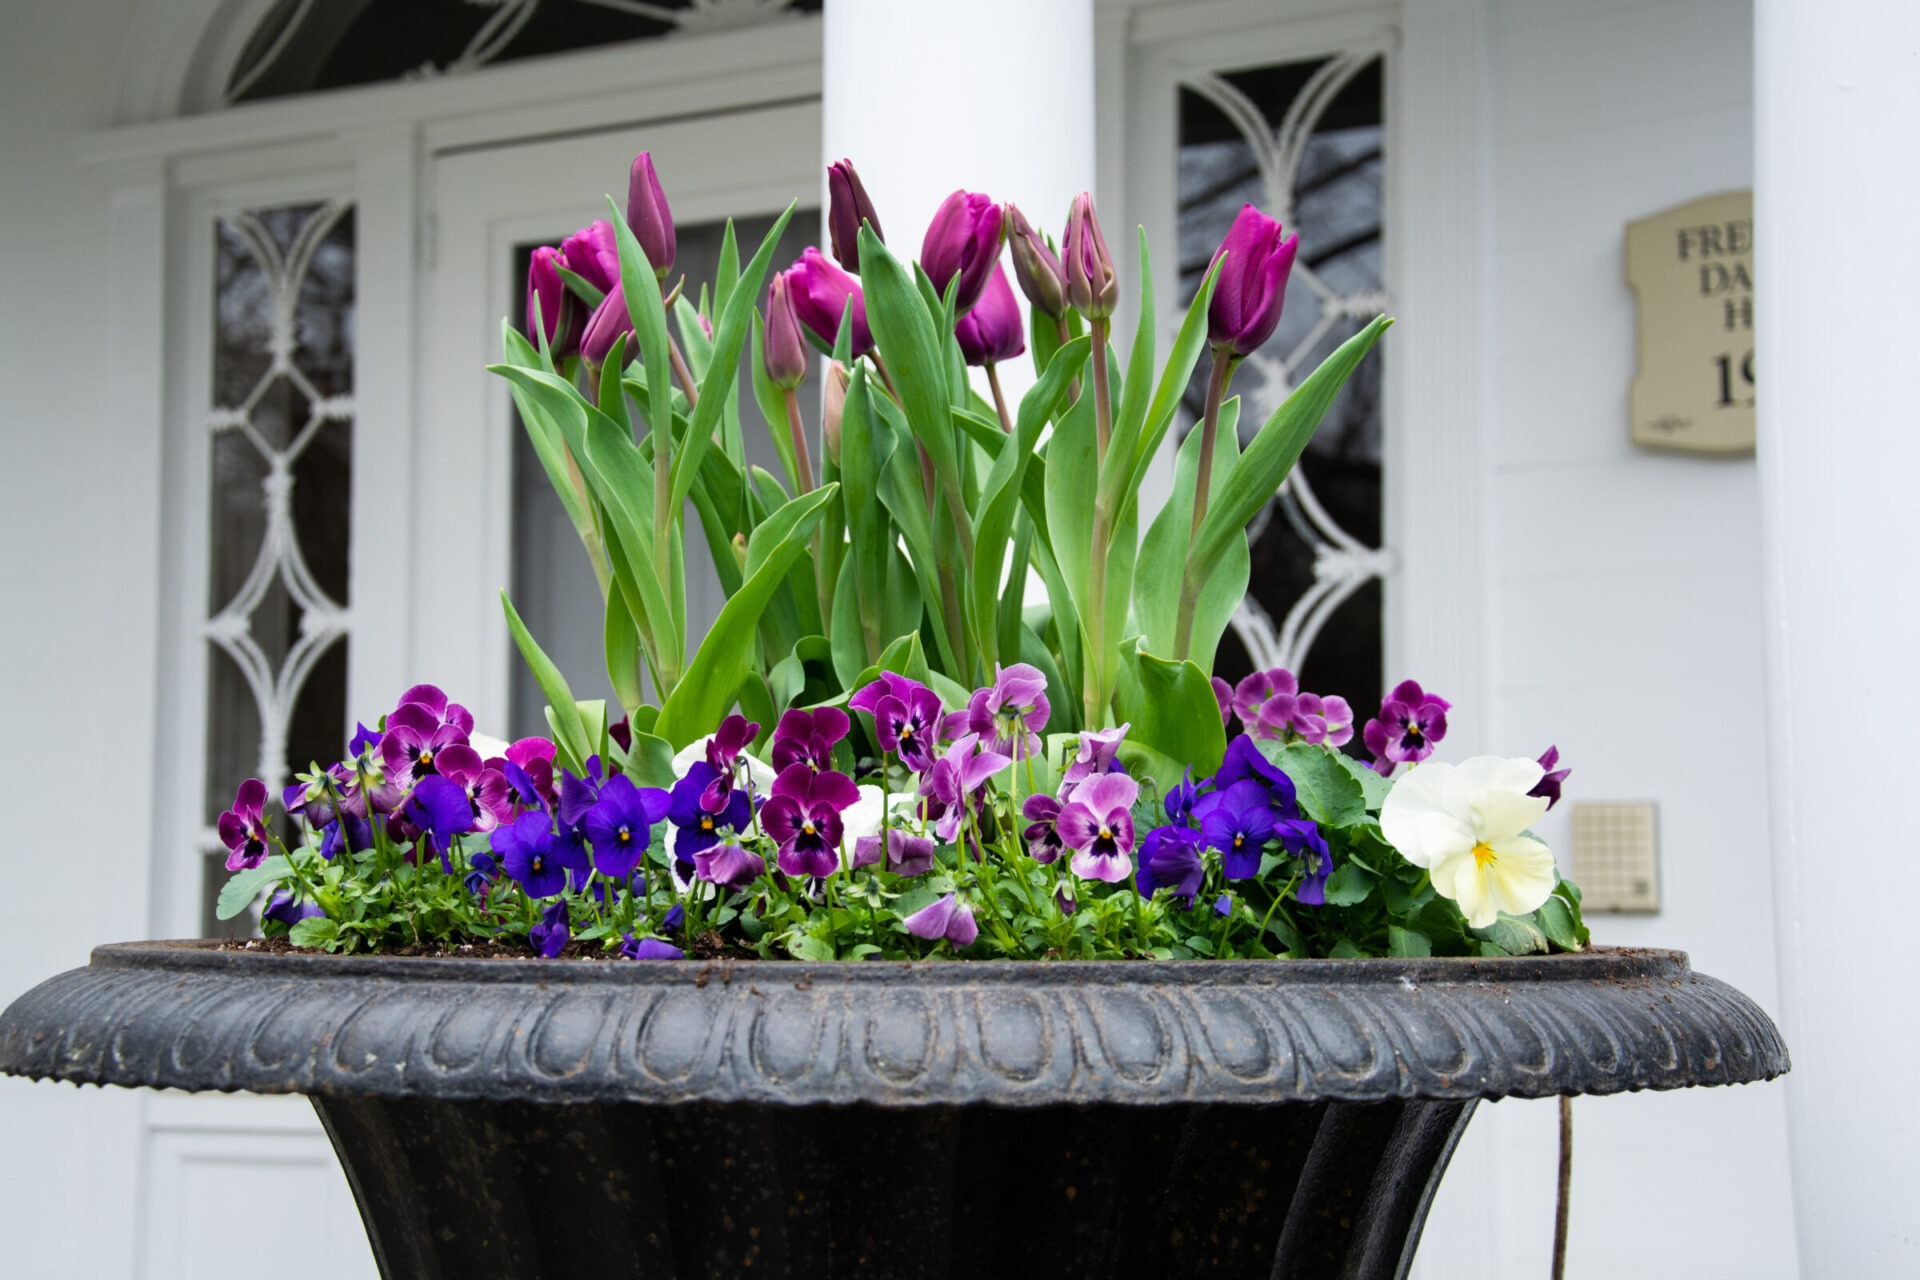 A large planter filled with vibrant purple tulips and multicolored pansies in front of a white door with decorative glass panels and a plaque.